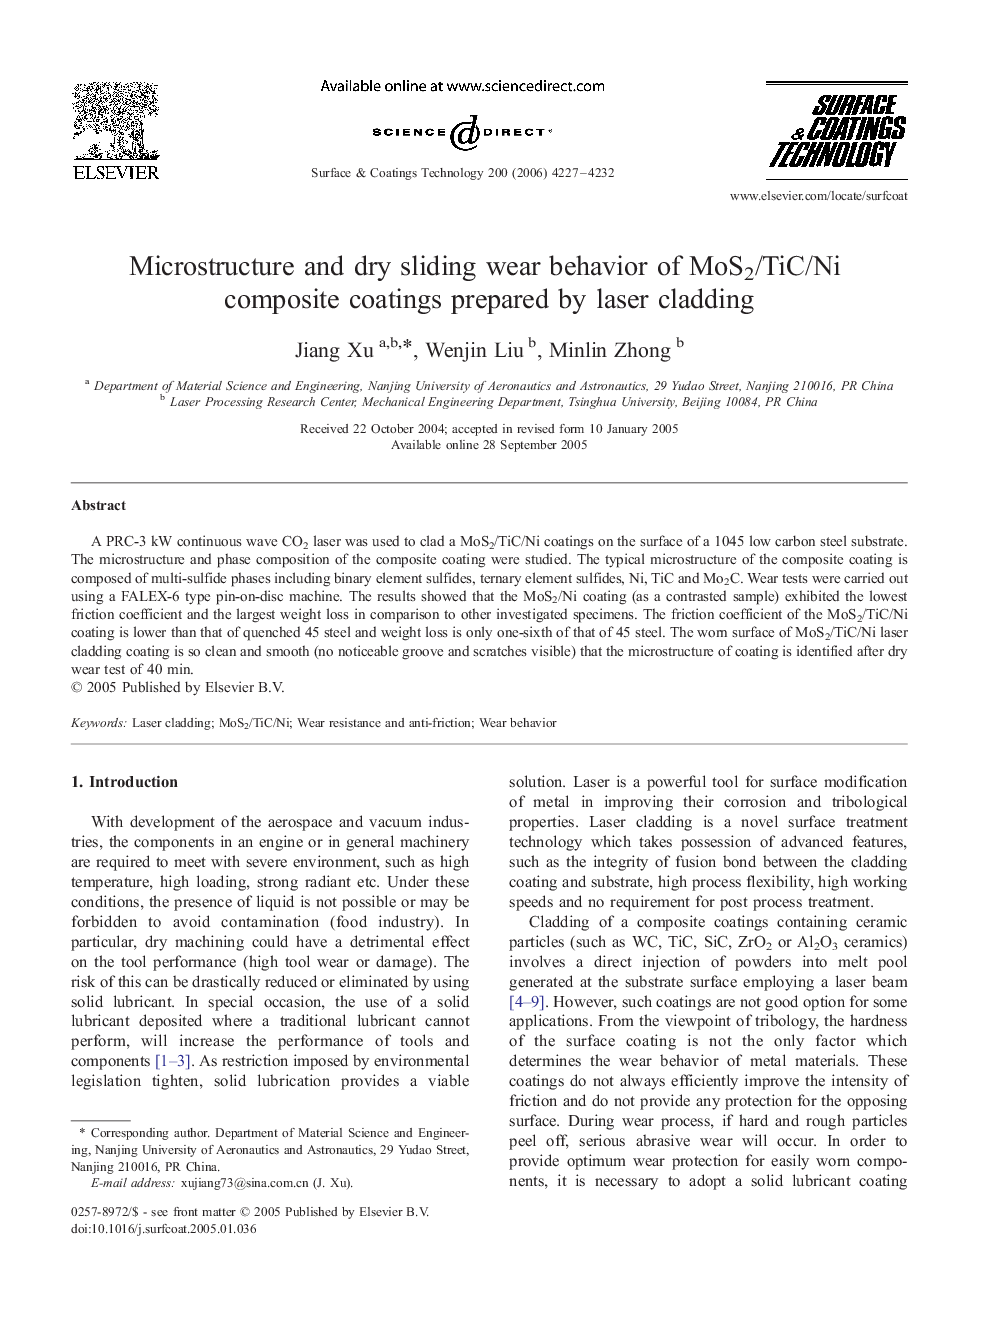 Microstructure and dry sliding wear behavior of MoS2/TiC/Ni composite coatings prepared by laser cladding